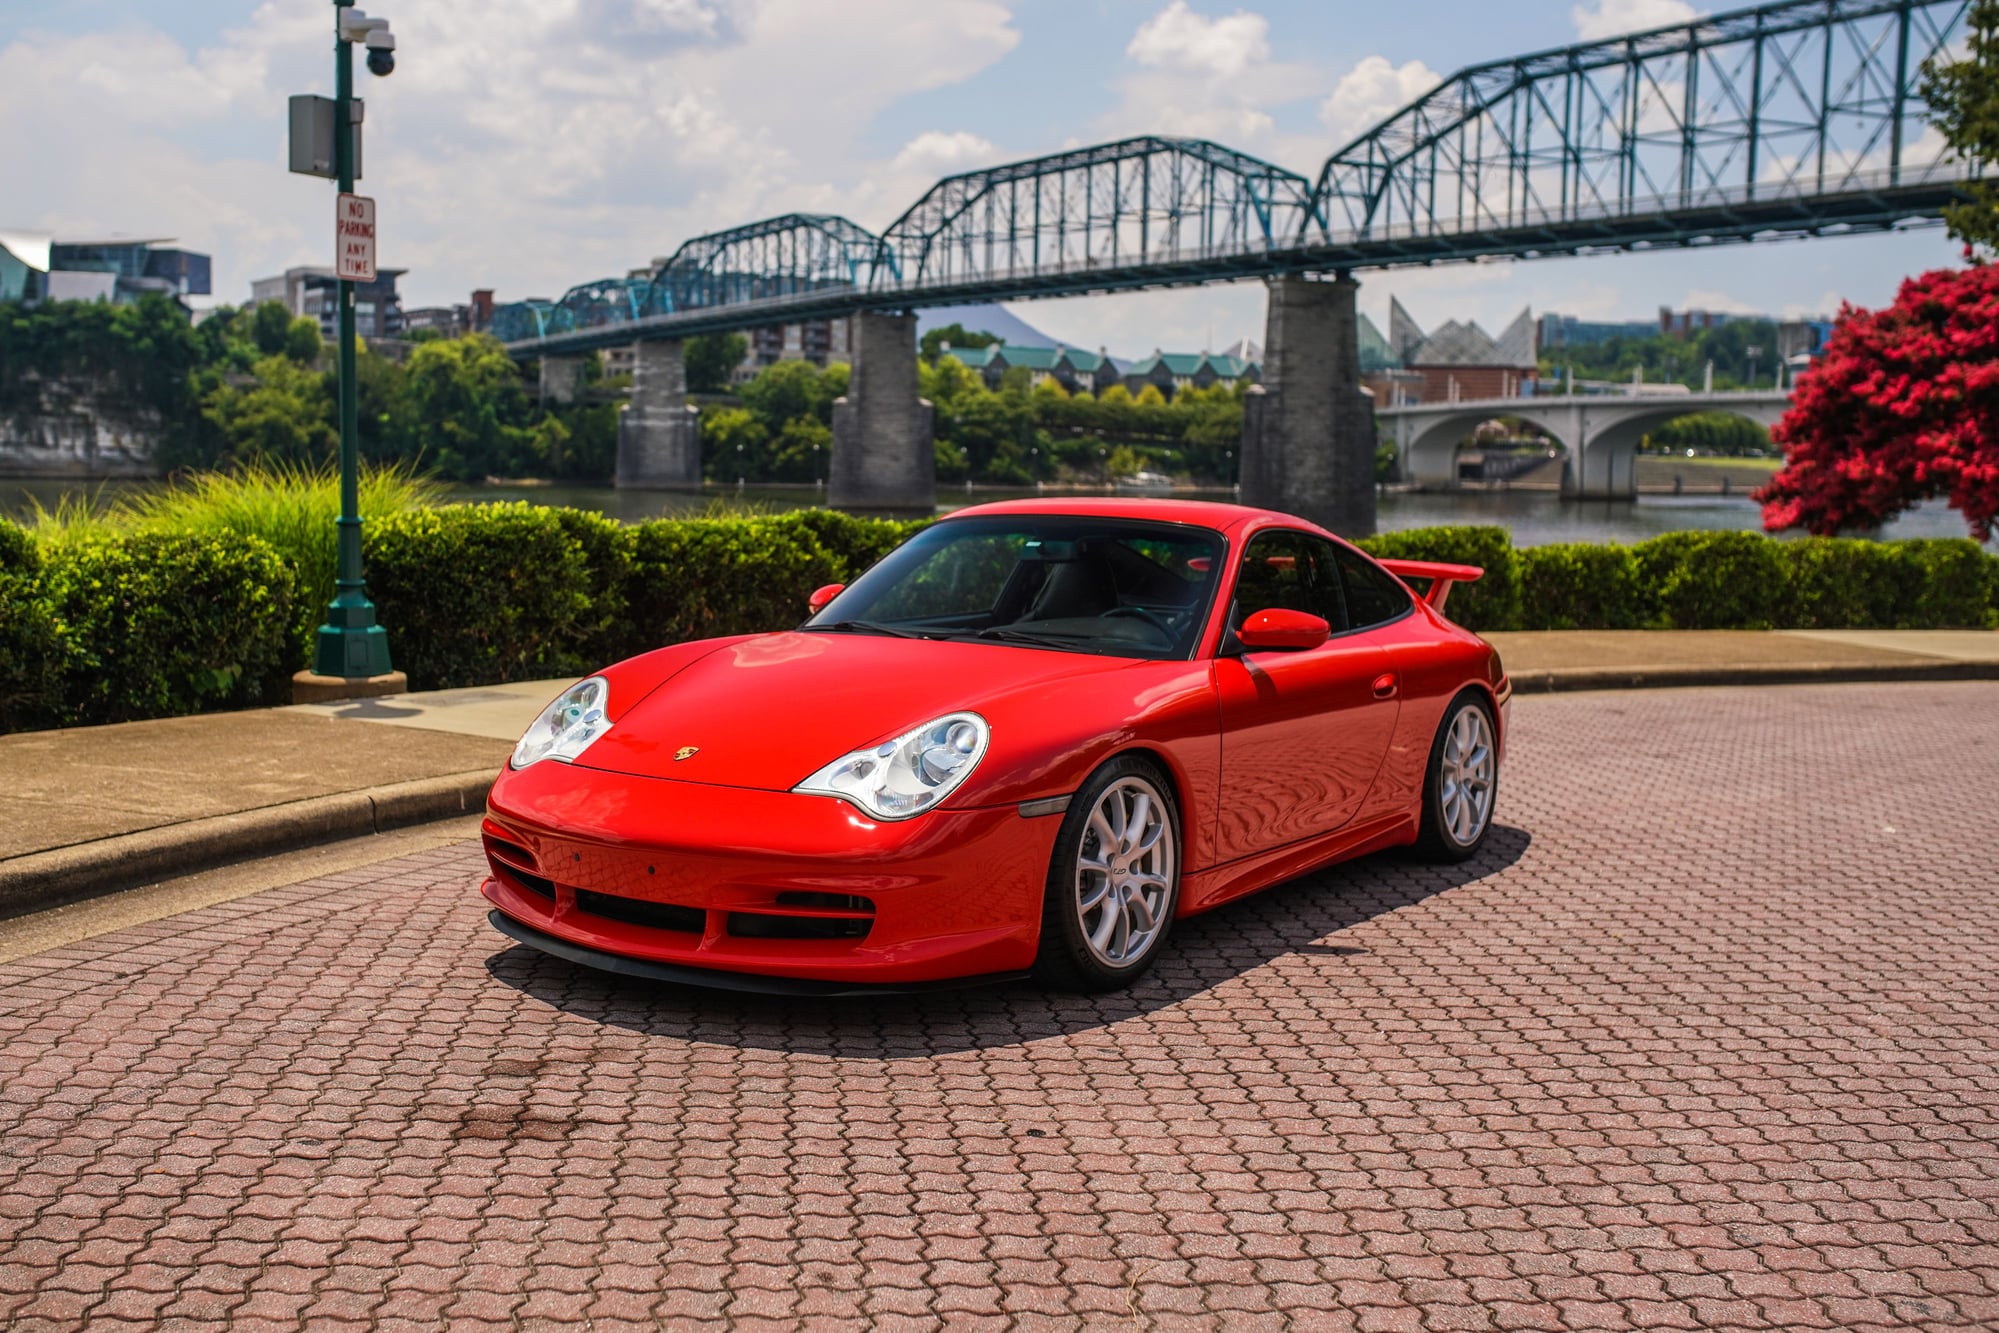 2004 Porsche GT3 - 2004 Porsche 911 GT3 - Used - VIN WP0AC299X4S692903 - 74,000 Miles - 6 cyl - Manual - Red - Chattanooga, TN 37363, United States